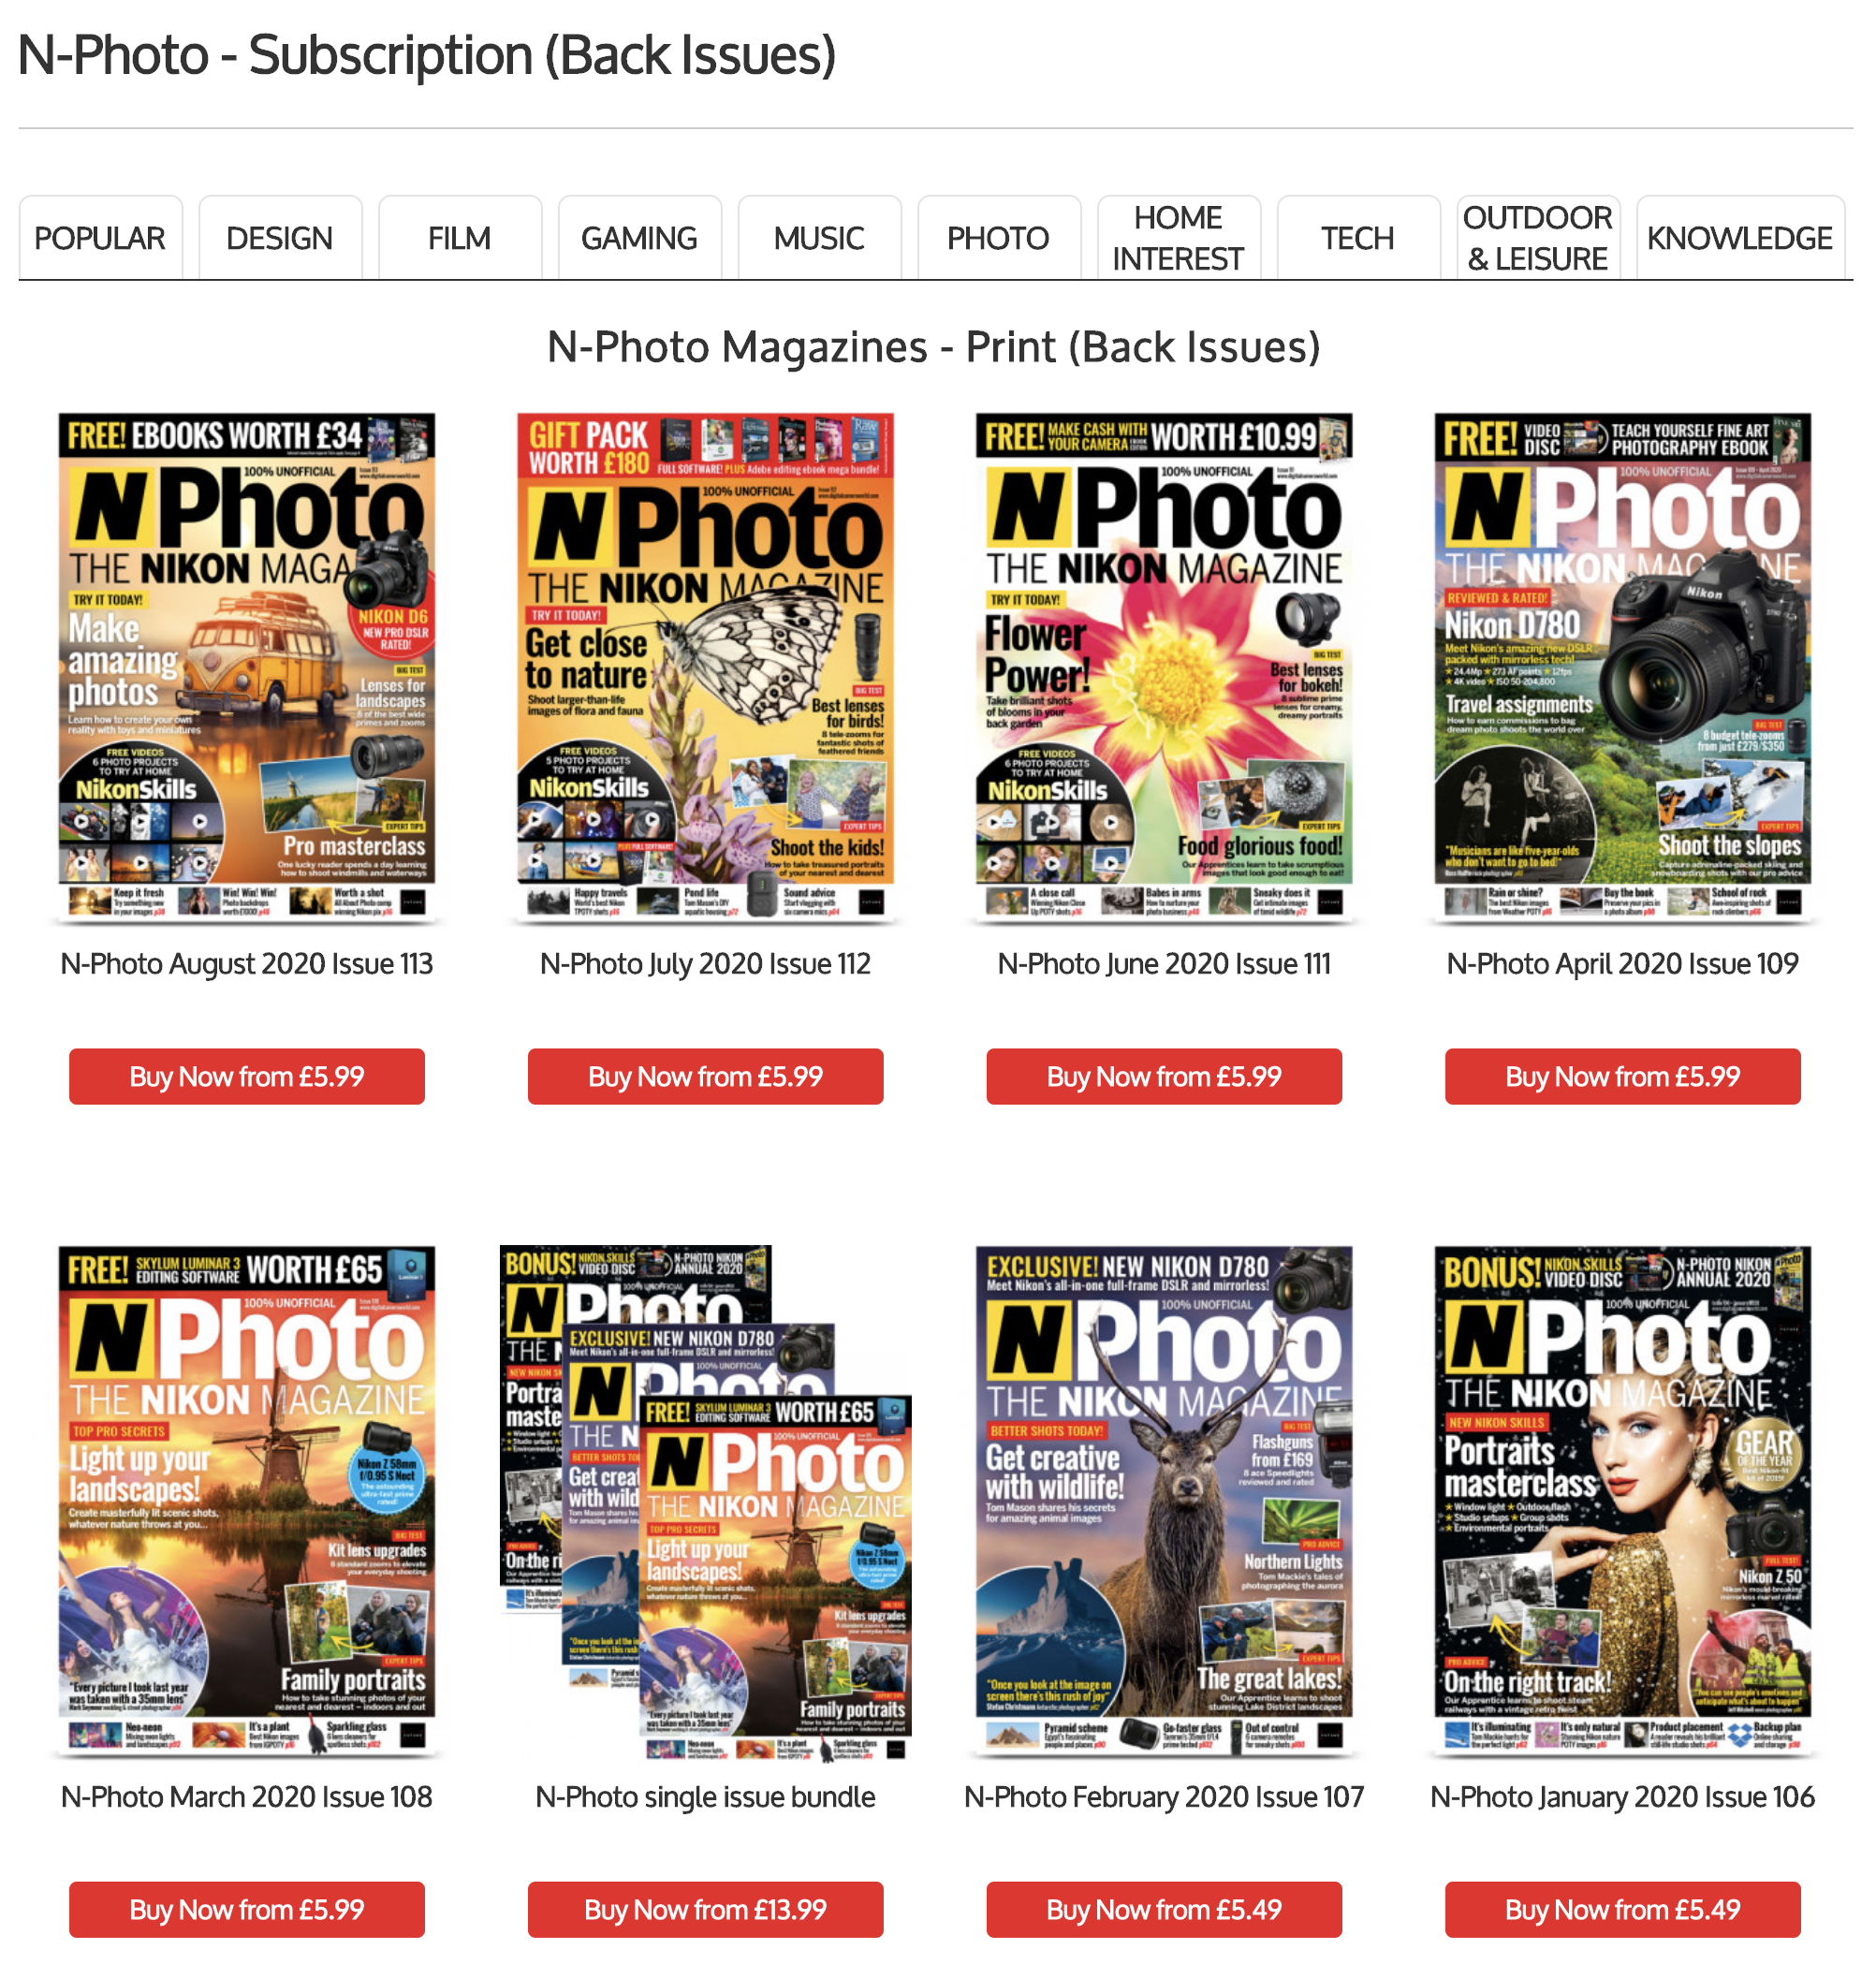 Previous issues of N-Photo are available online